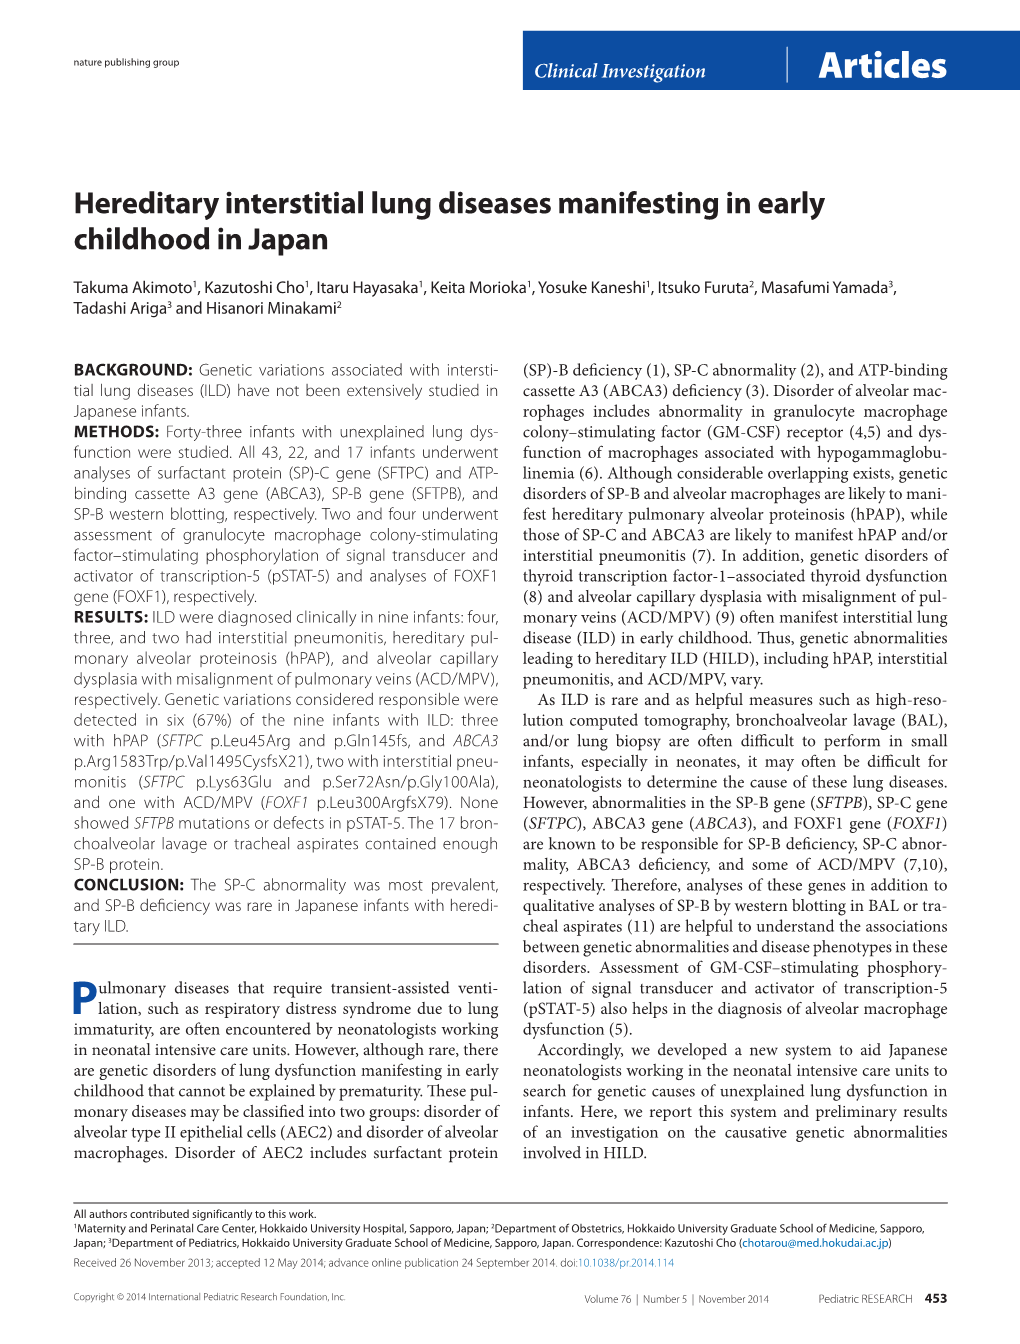 Hereditary Interstitial Lung Diseases Manifesting in Early Childhood in Japan